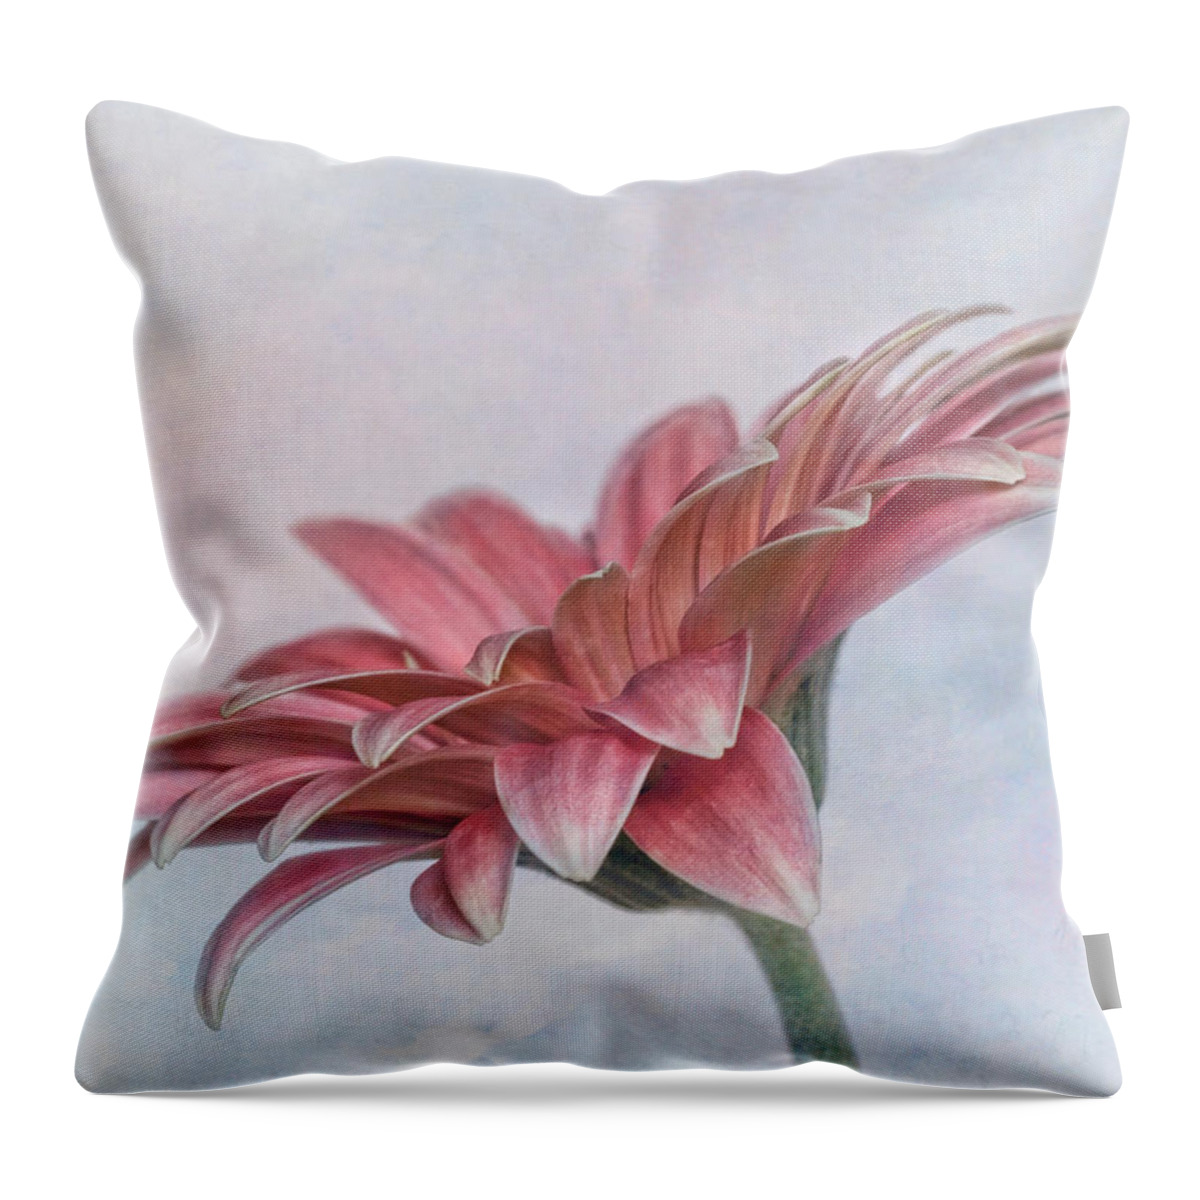 Bloom Throw Pillow featuring the photograph Daisy Profile by David and Carol Kelly